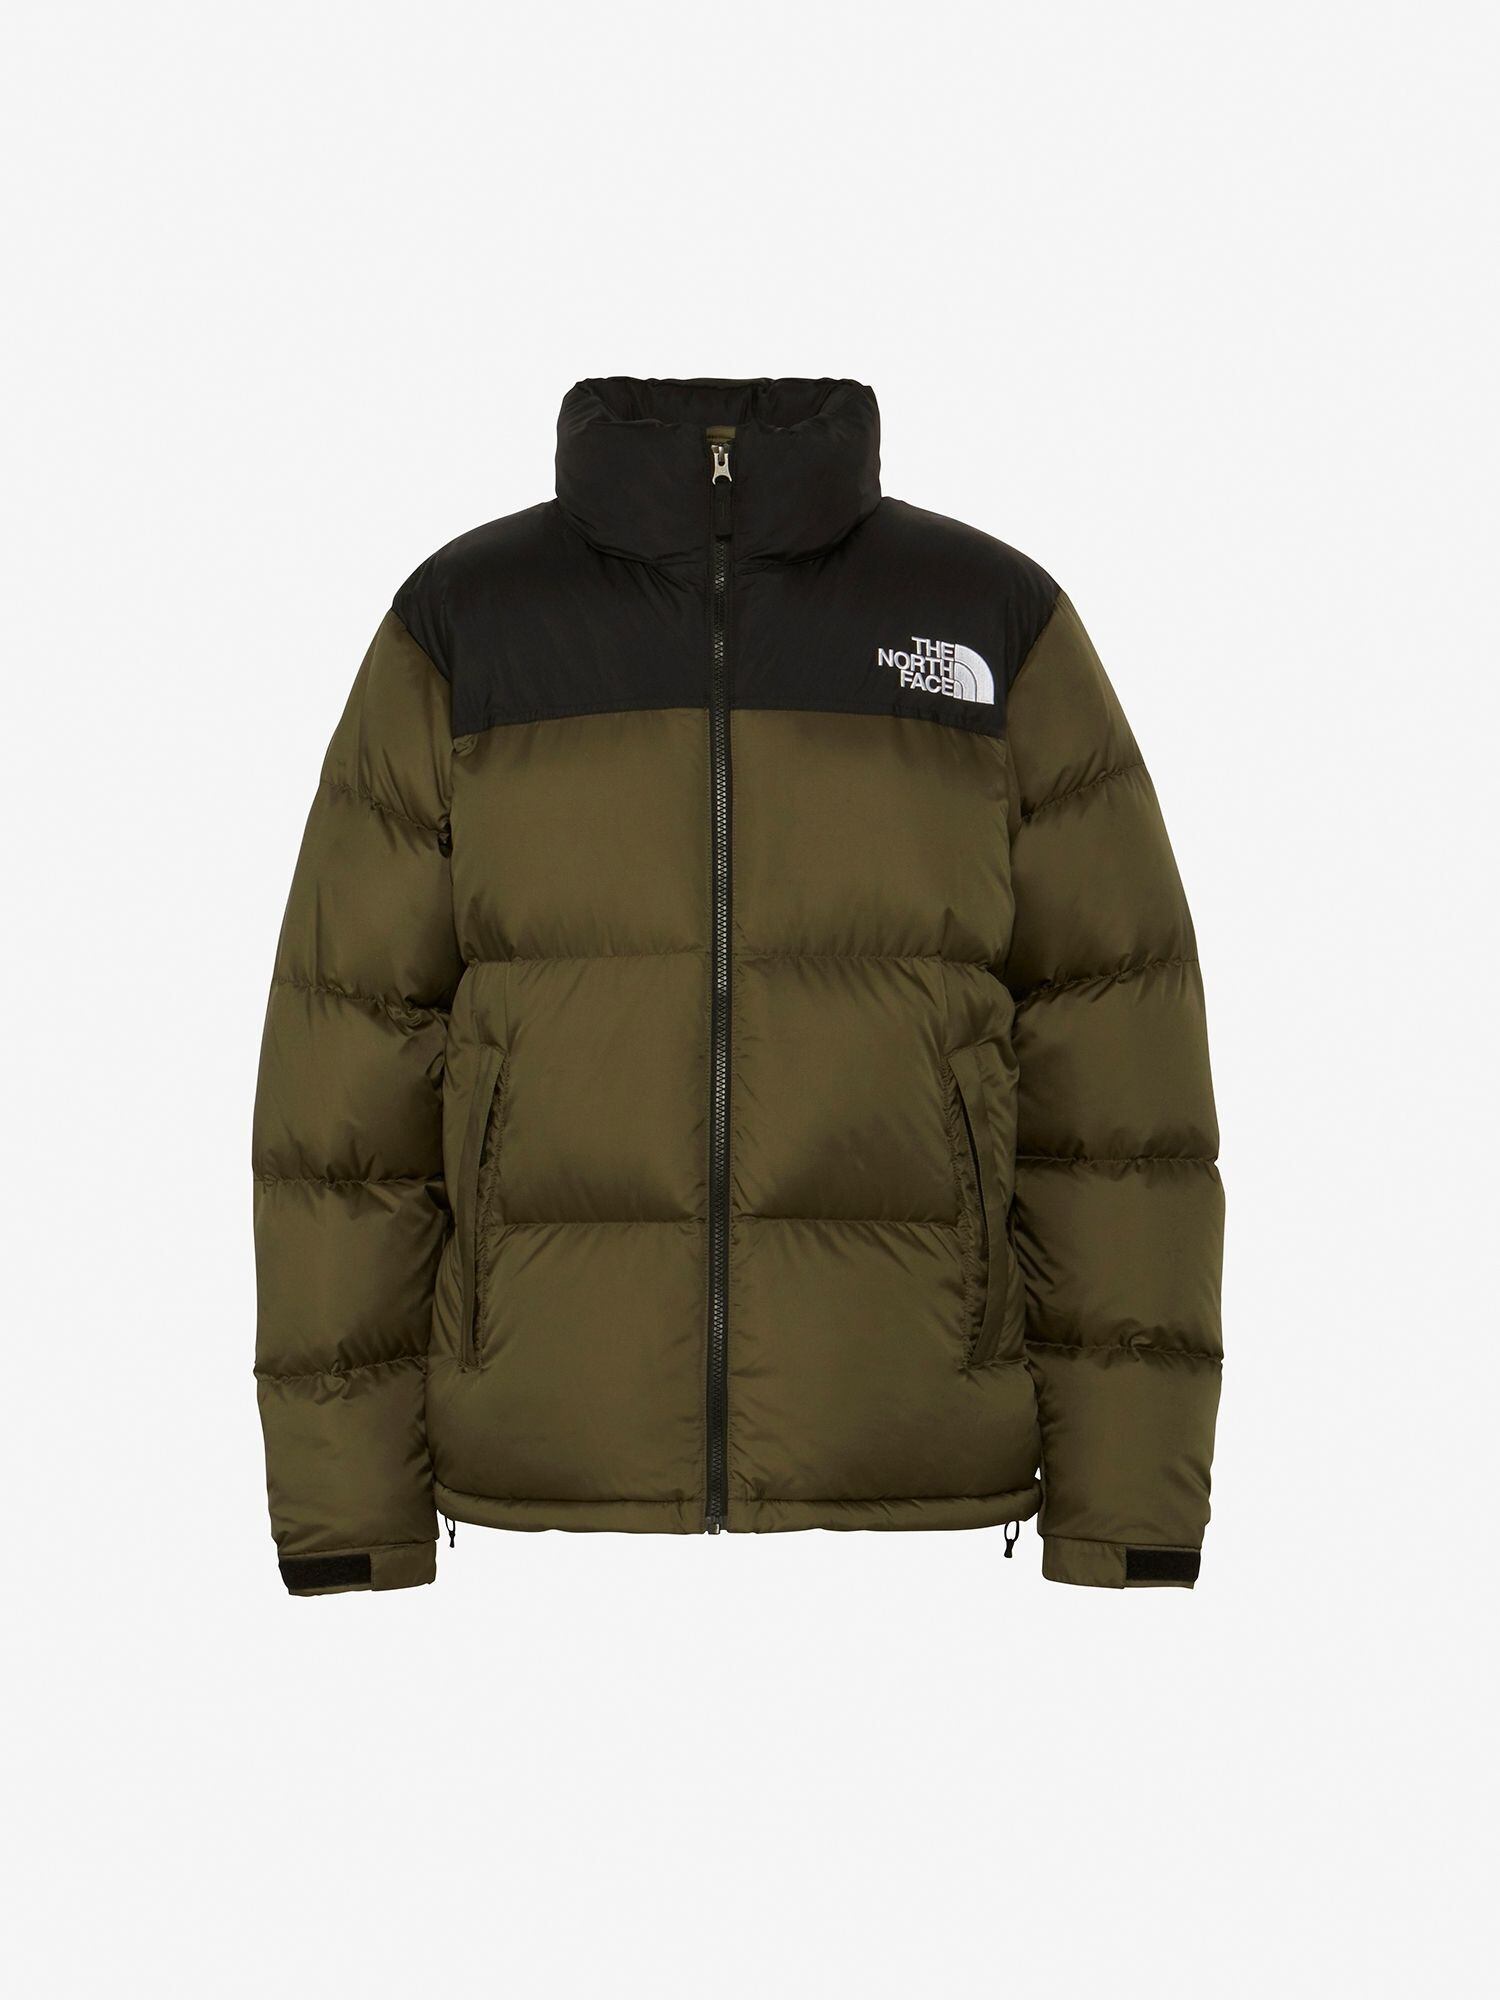 THE NORTH FACE / NUPTSE JACKET（ND92335） | st. valley house